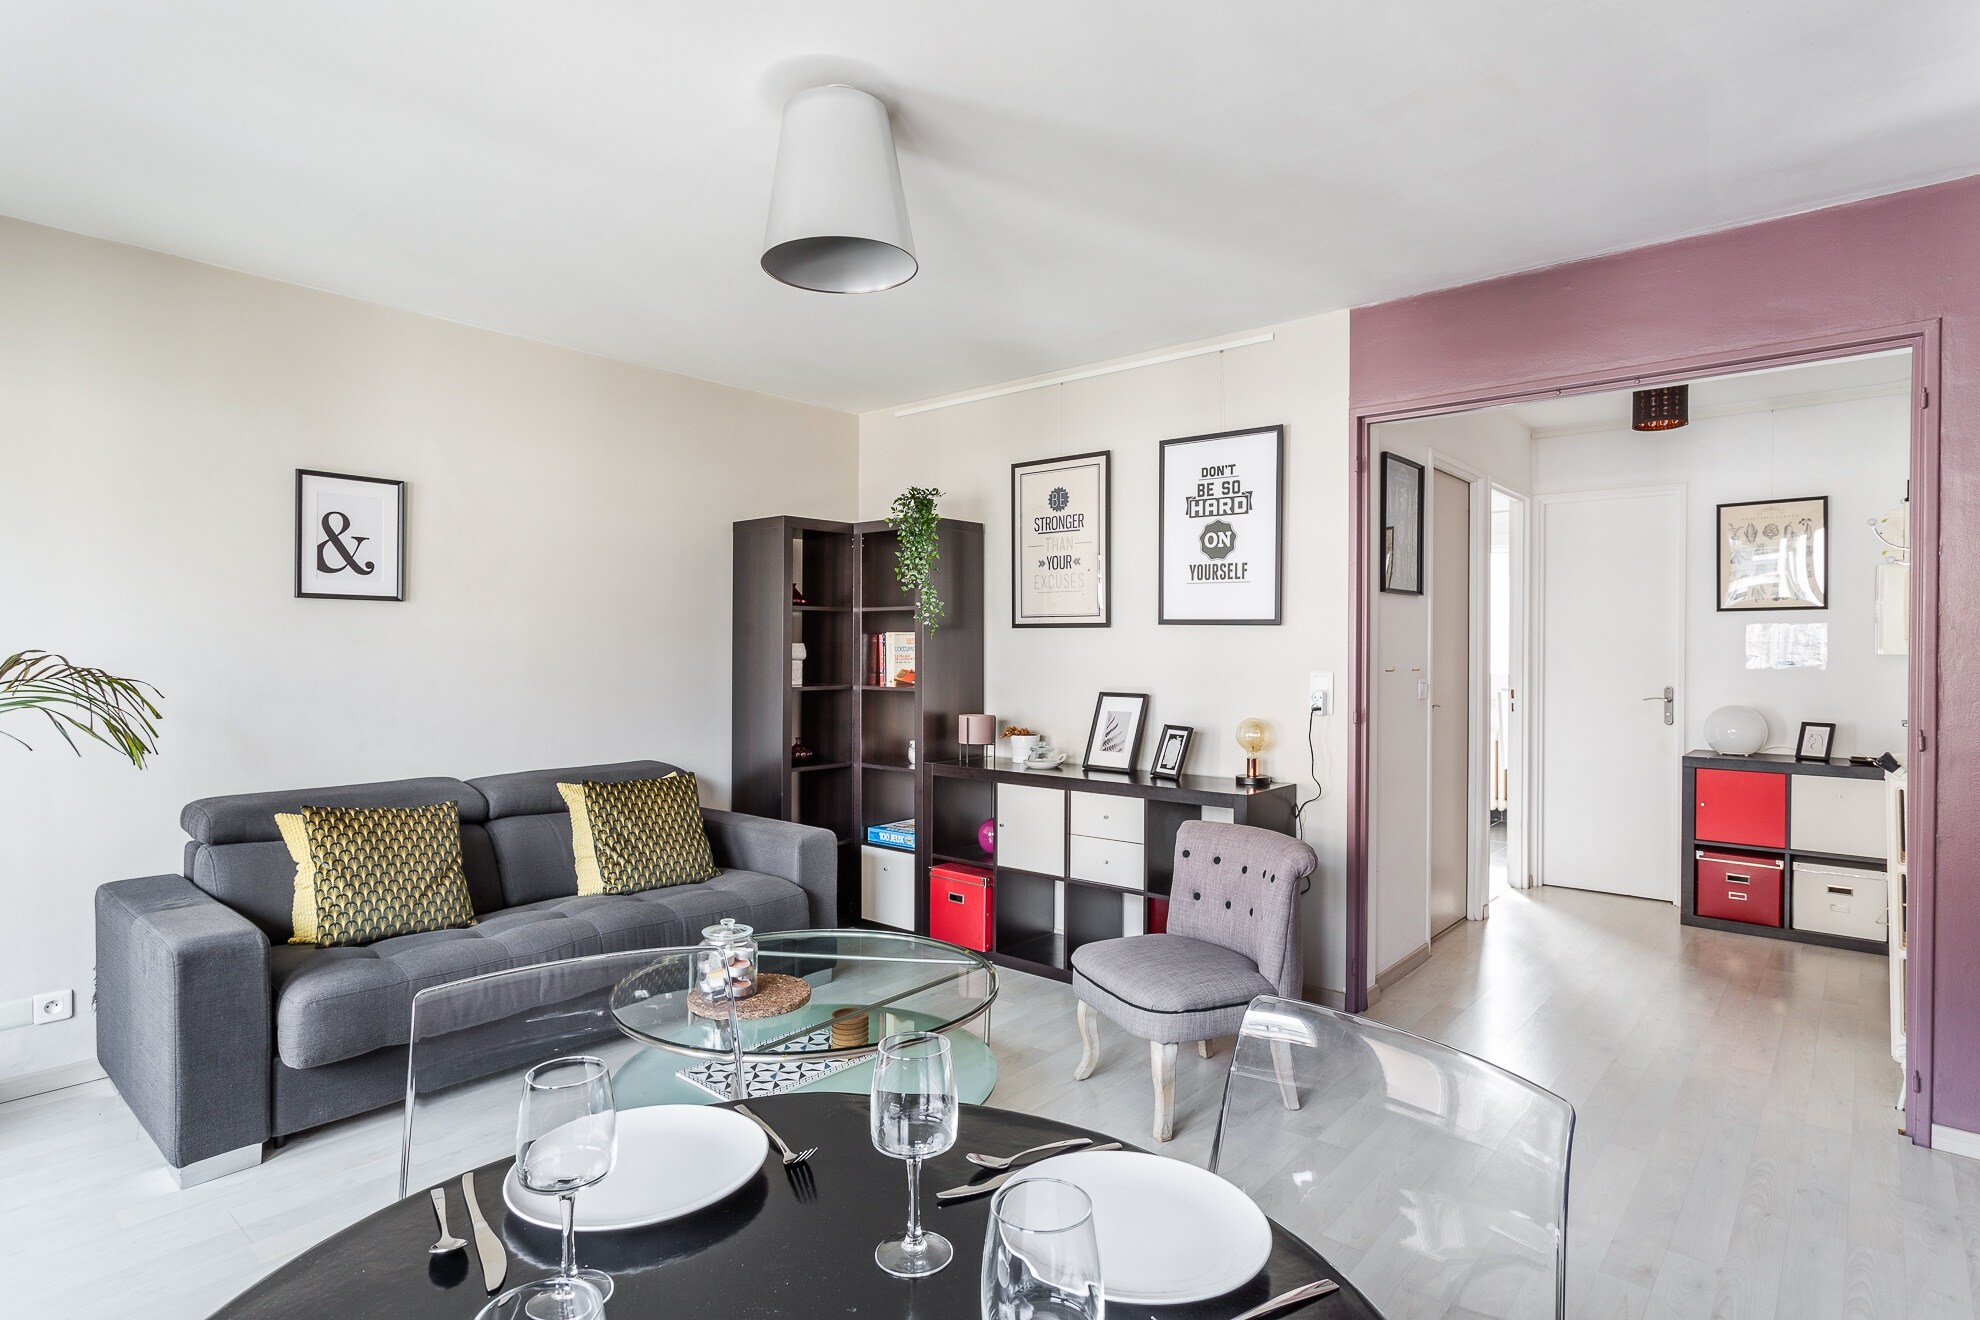 Property Image 1 - Bright two bedroom apartment with a small balcony in Rennes